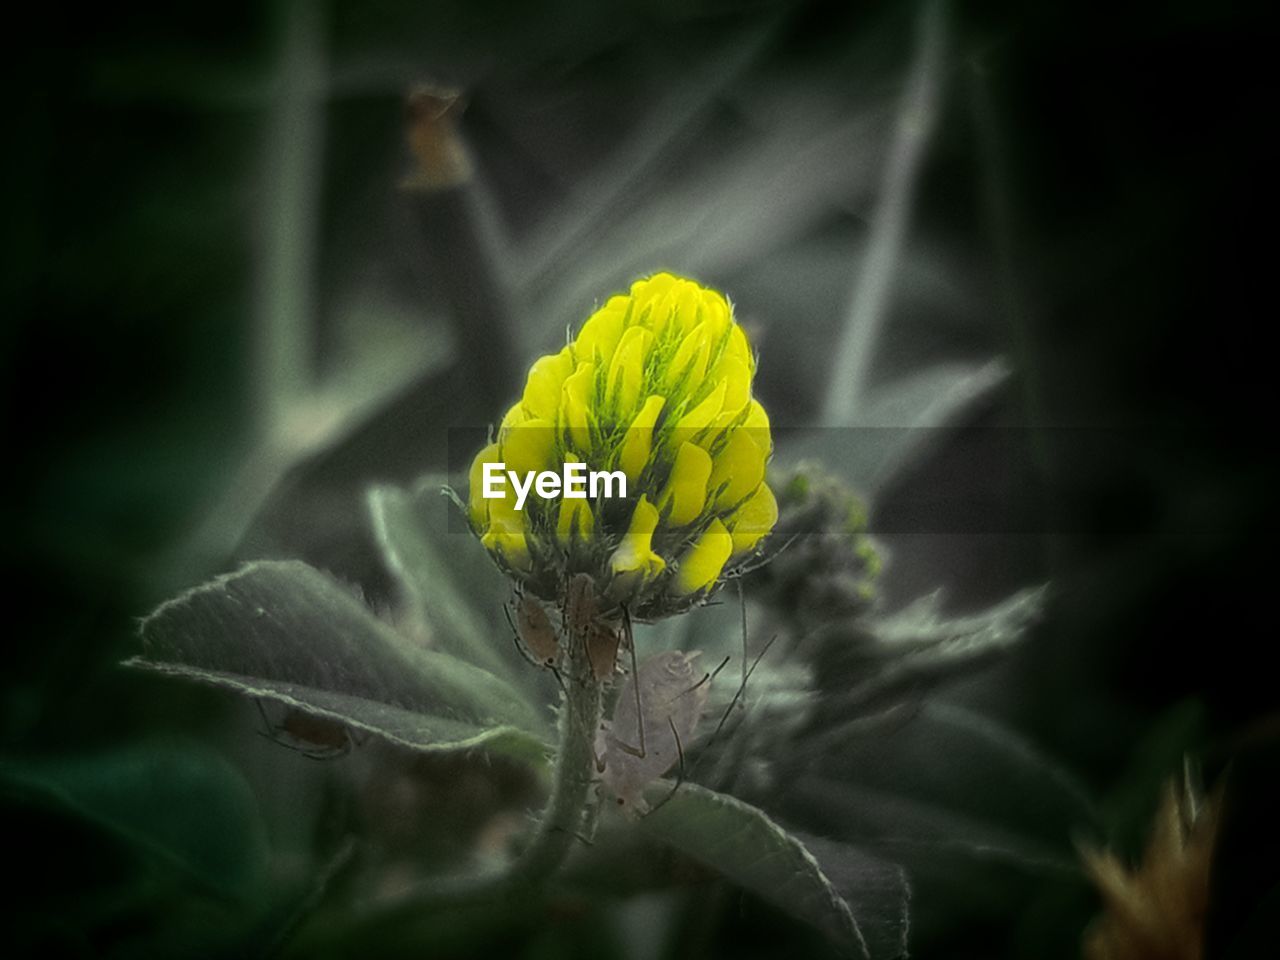 CLOSE-UP OF YELLOW FLOWER AGAINST BLURRED BACKGROUND